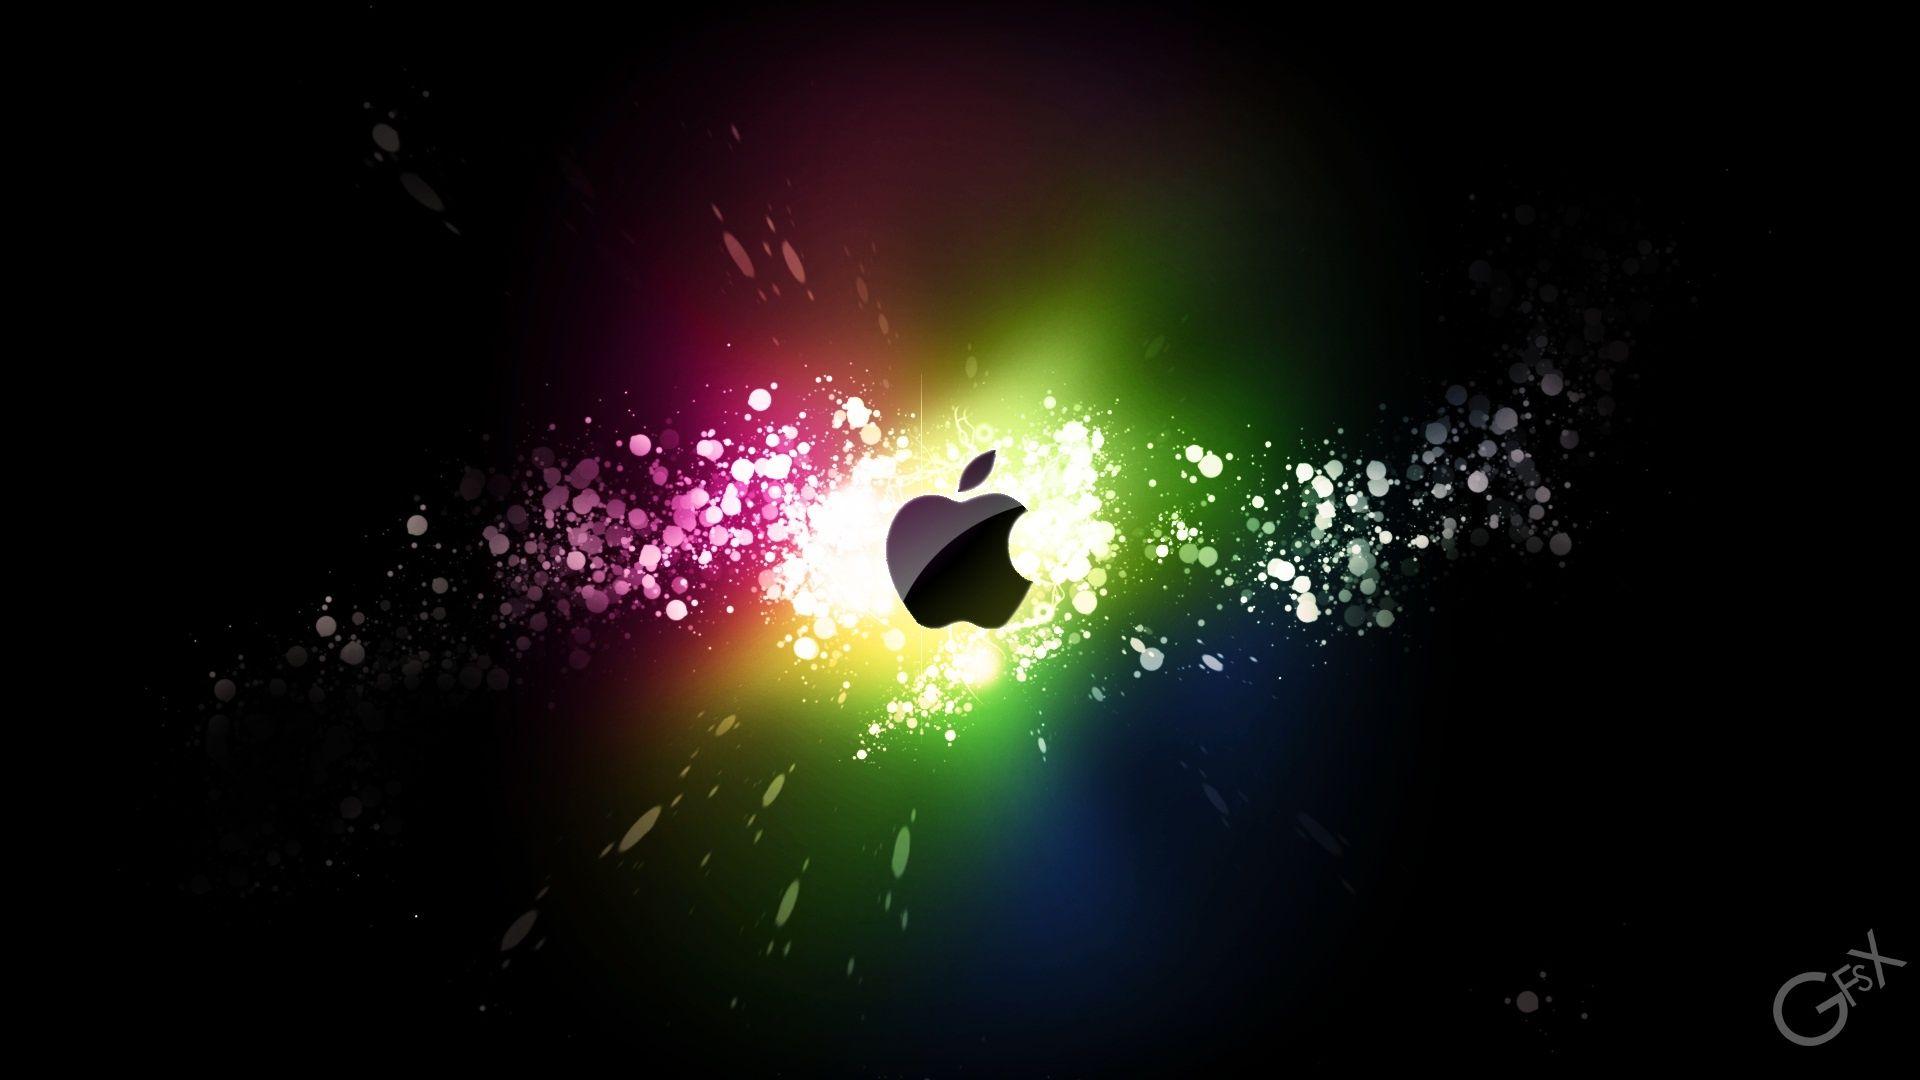 I love everything and anything made by Apple. Apple logo